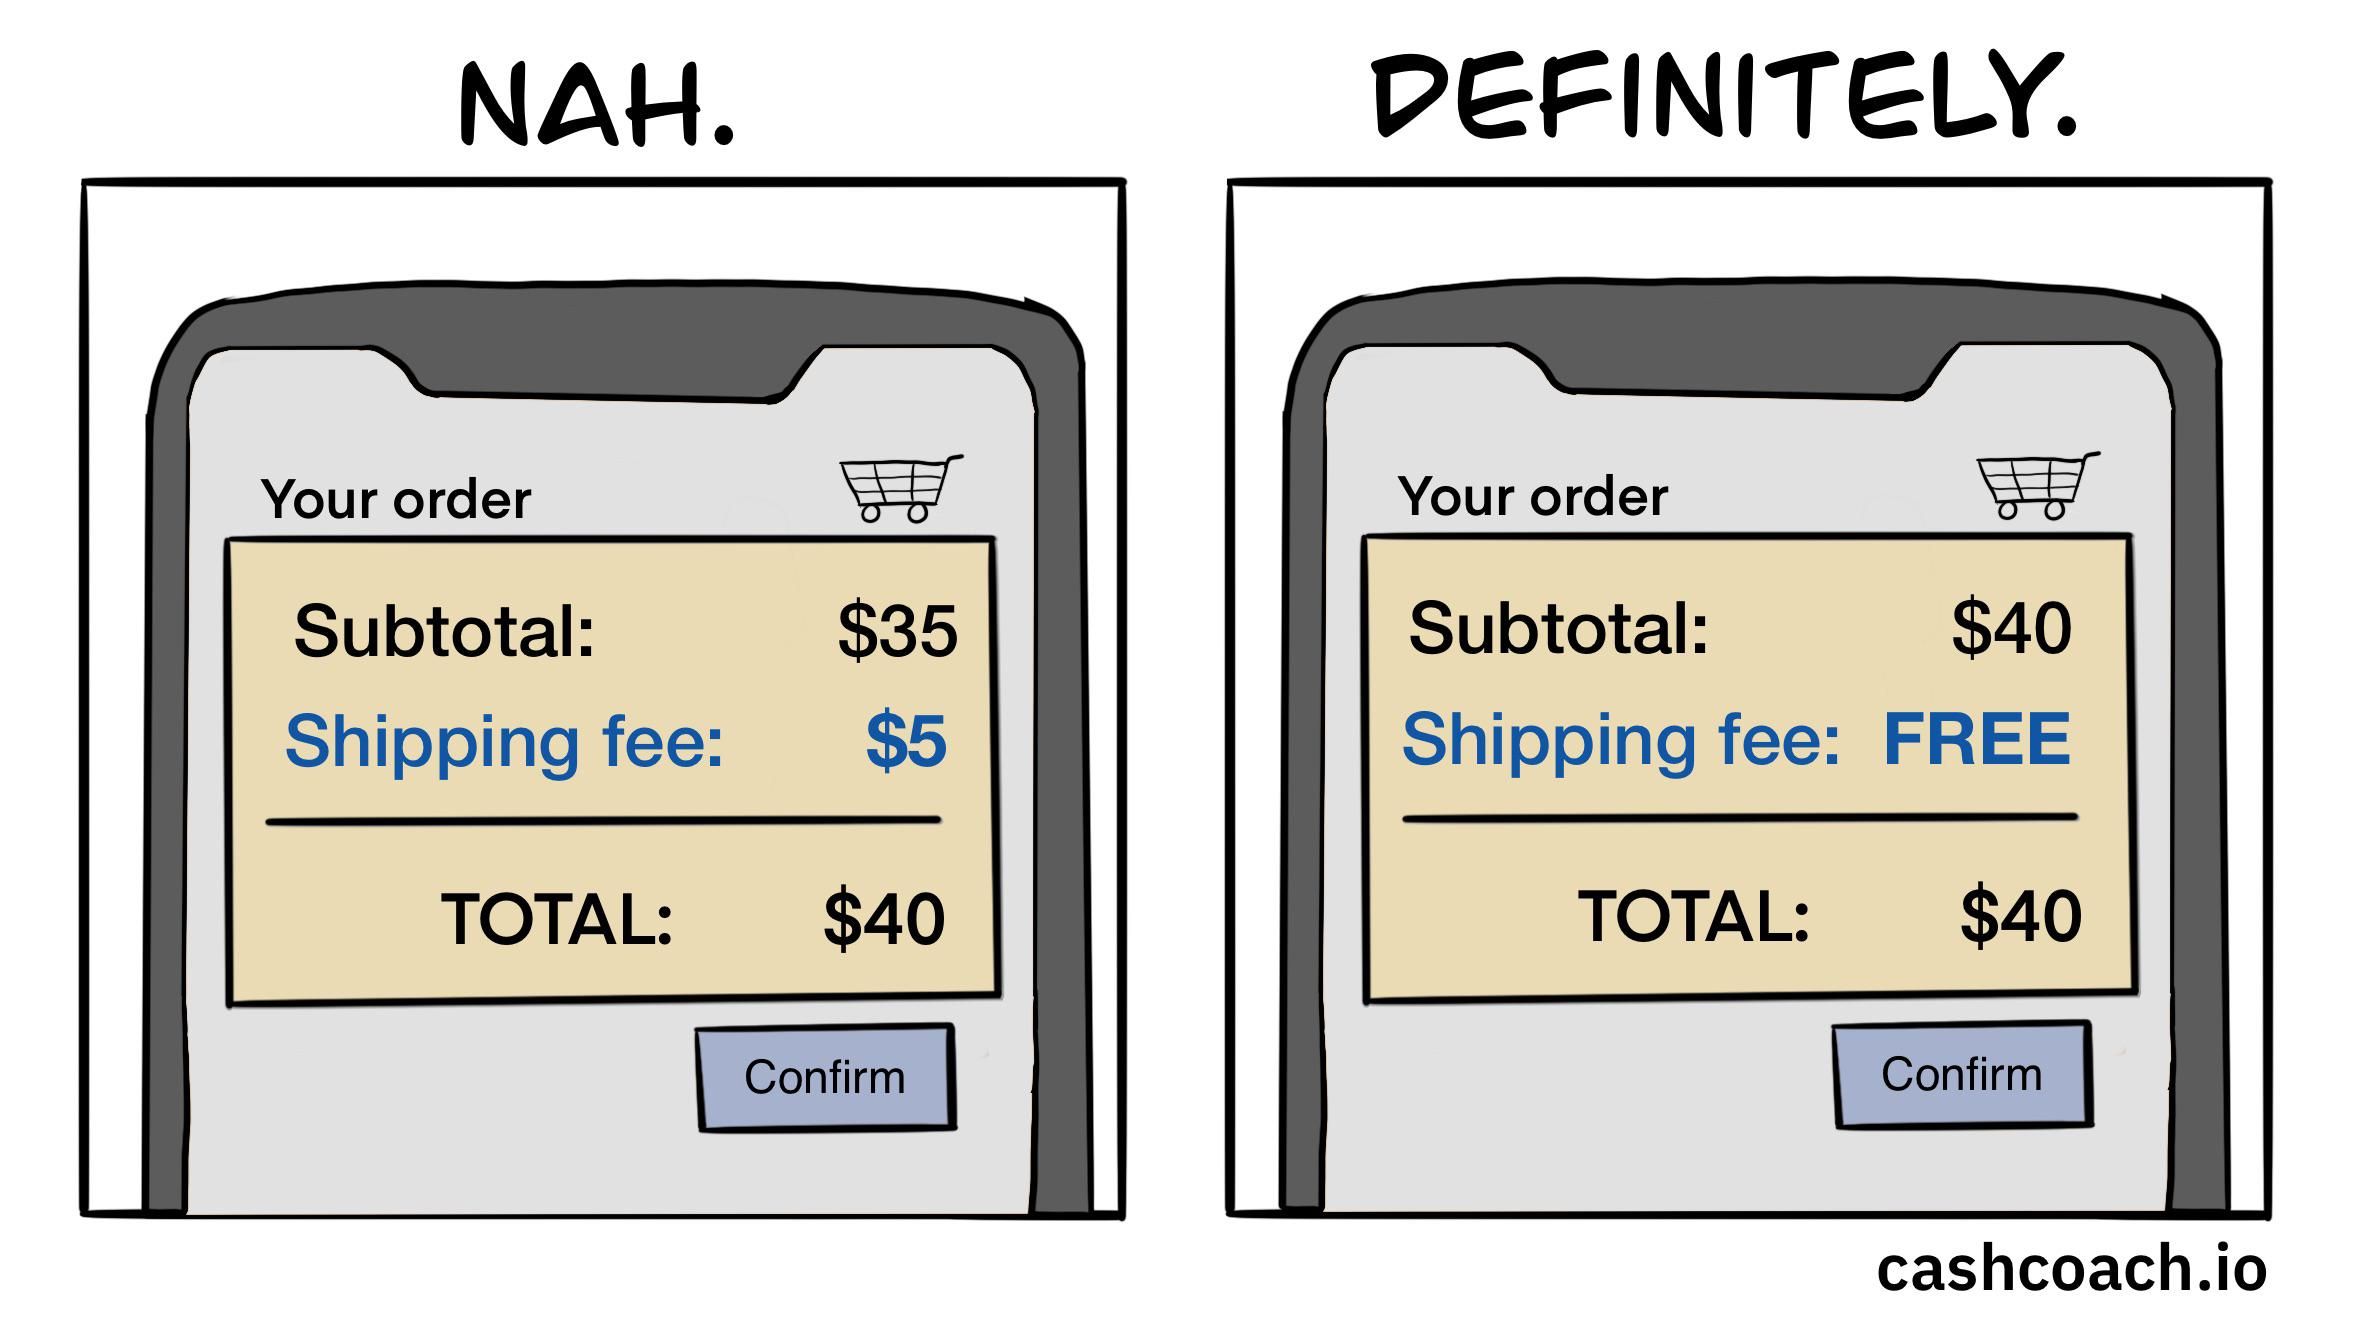 Shipping fees are outrageous!